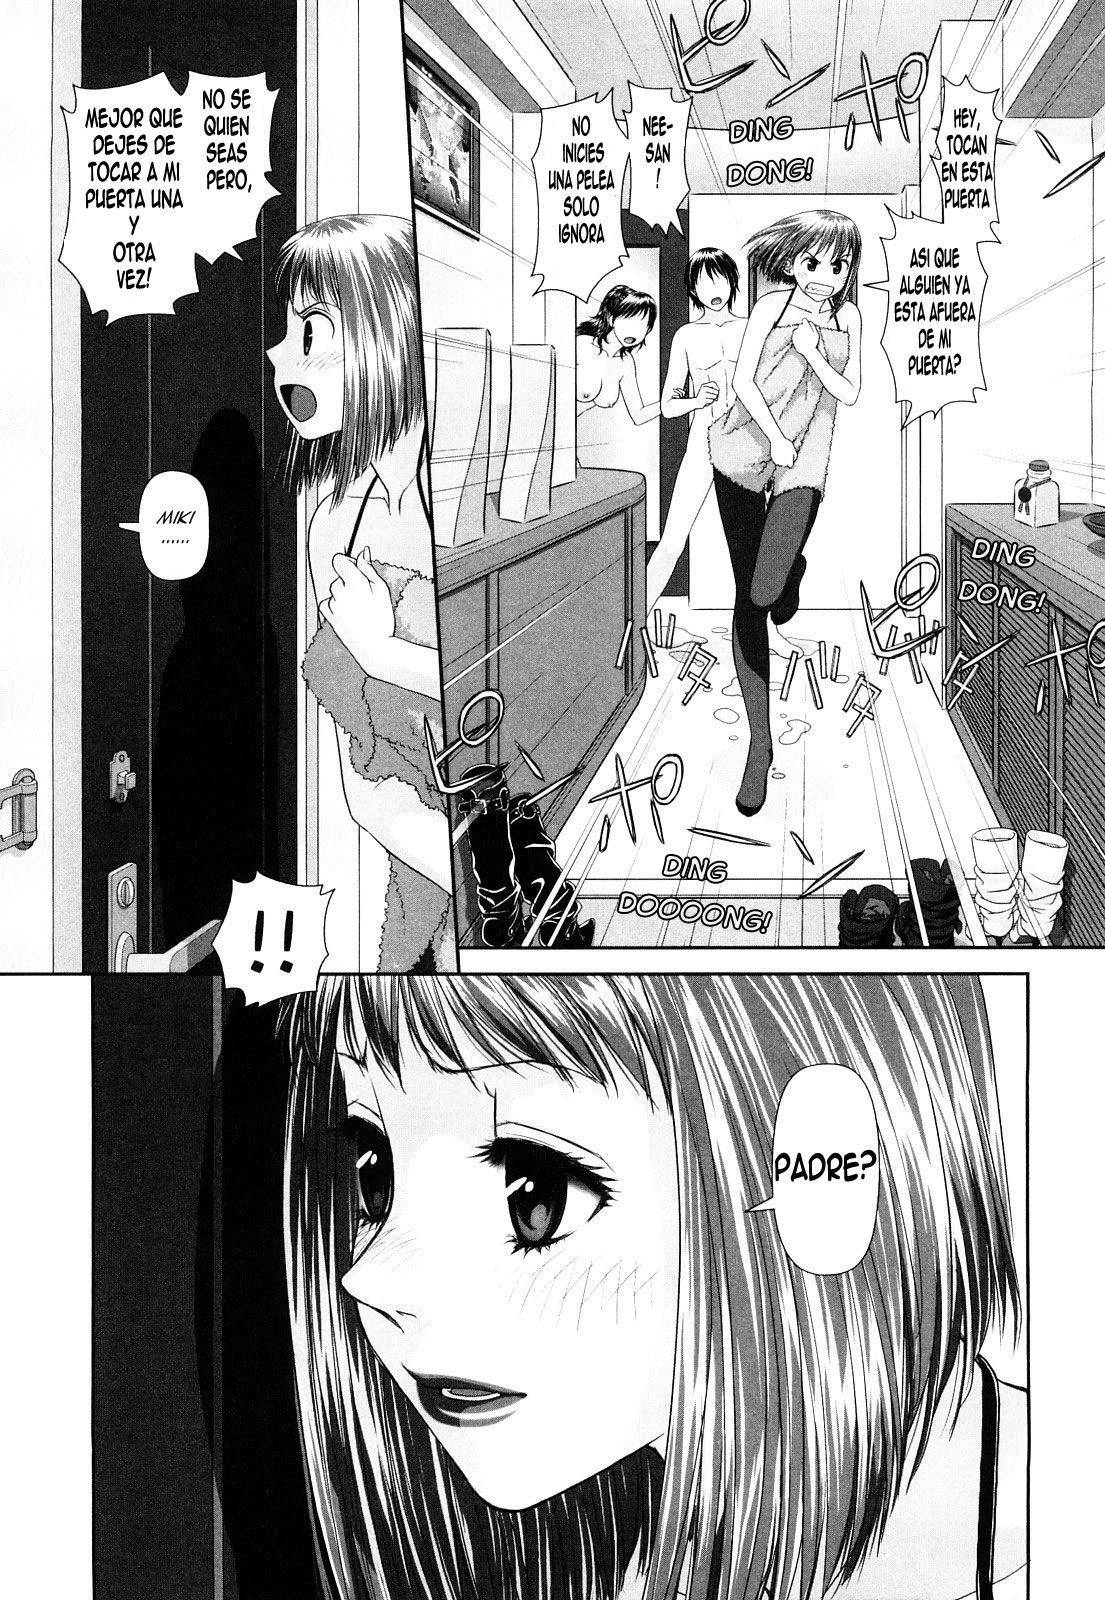 [Yui Toshiki] My Sisters Ch.1-7 [Spanish] {zoofixx}  =FMR= - E-Hentai Galleries